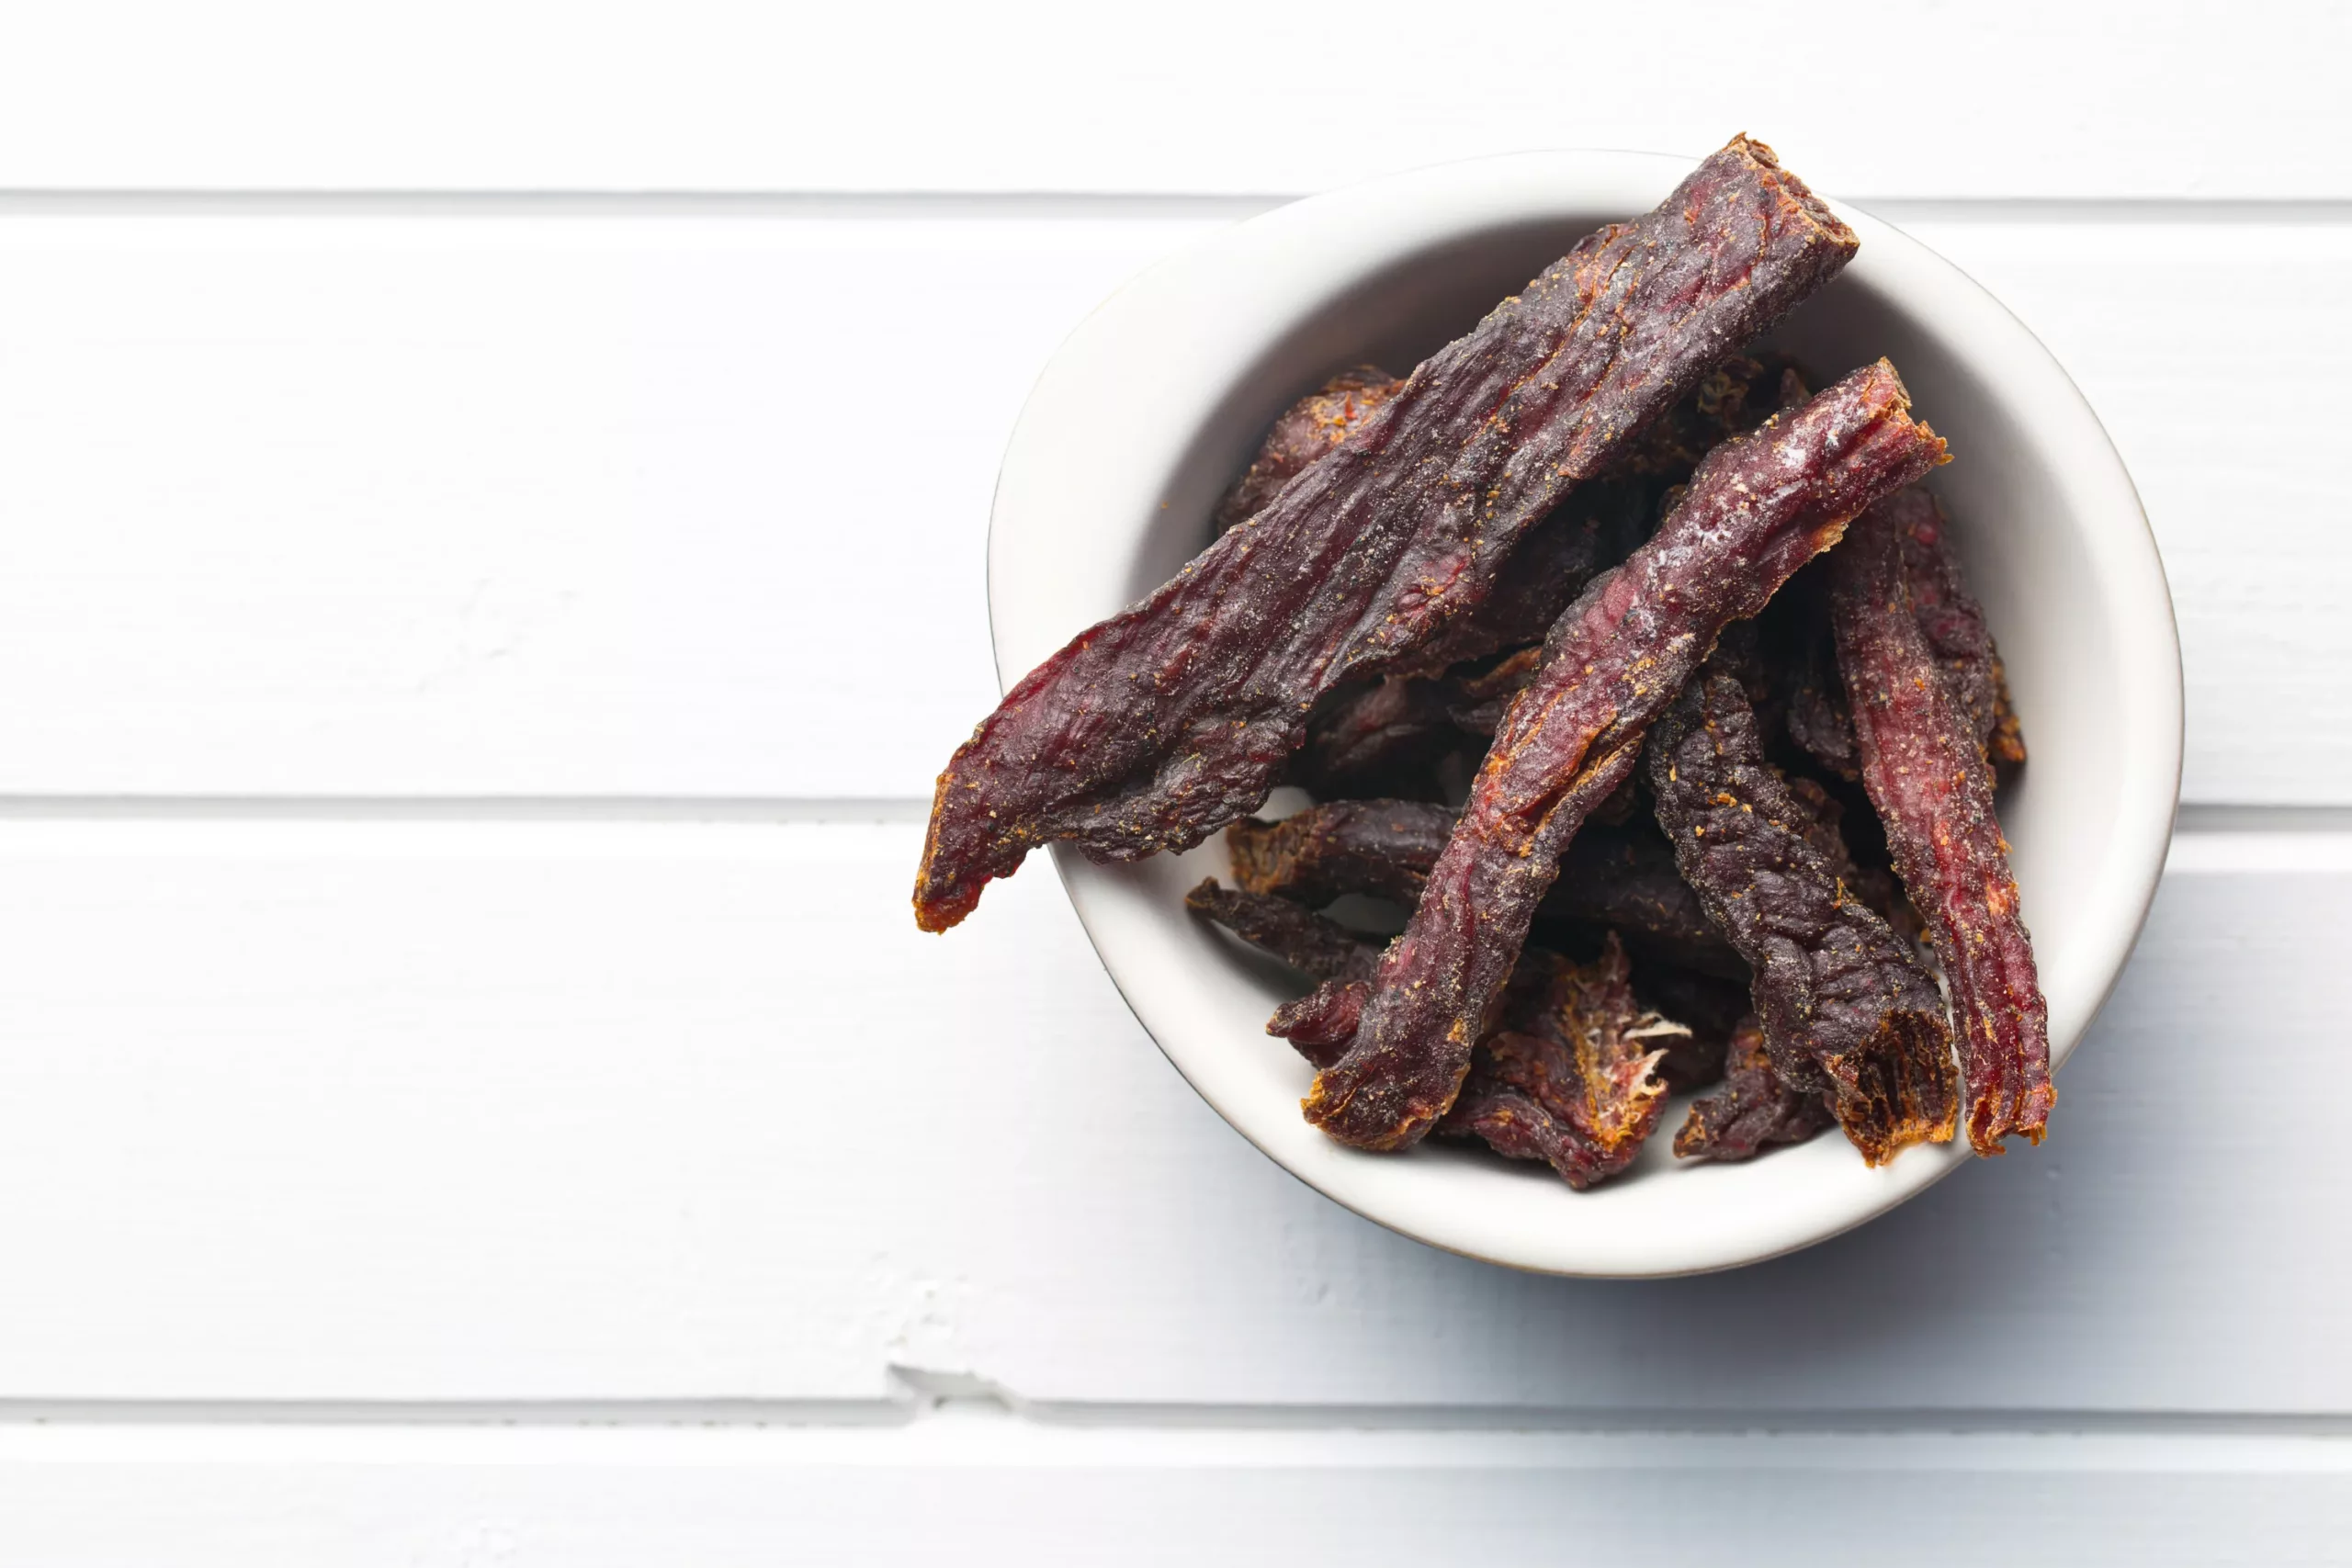 What is vegan jerky made of?